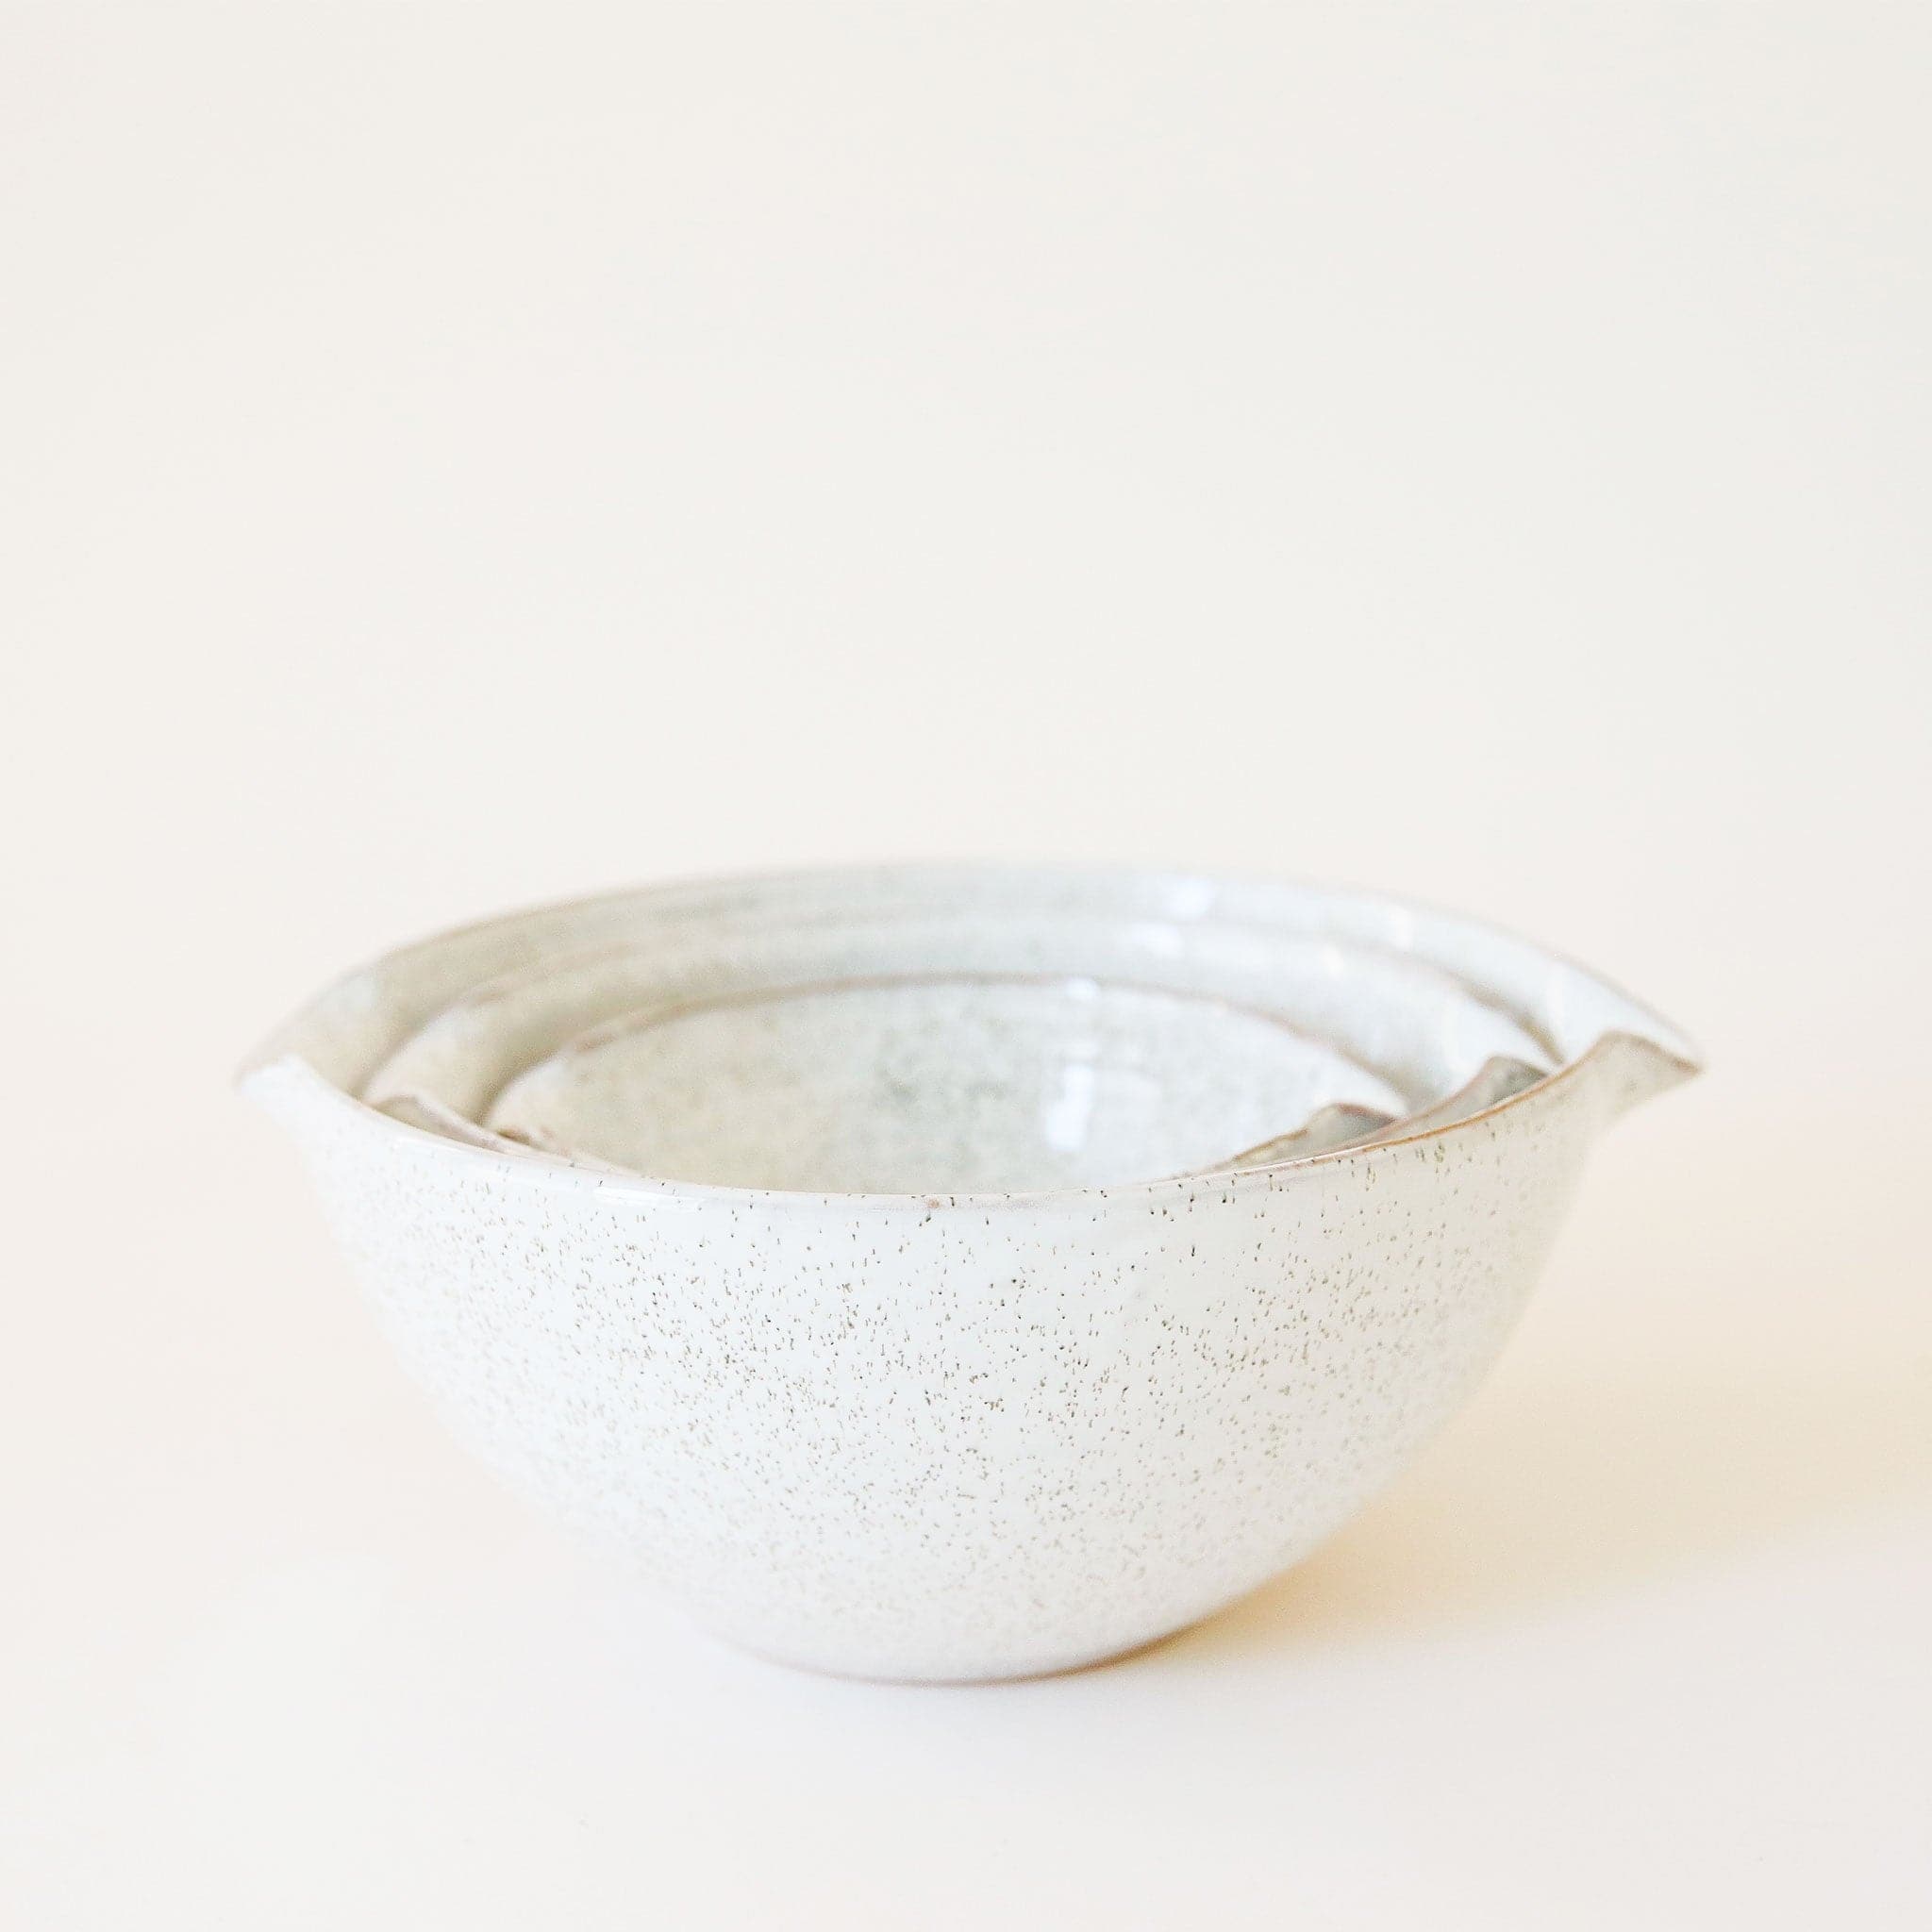 A set of three ceramic bowls nested inside one another. They feature a white base, glossy finish and a tan/brown speckled design. They are rounded bowls with a 'v' shaped design on two of the sides making them ideal for pouring if needed.